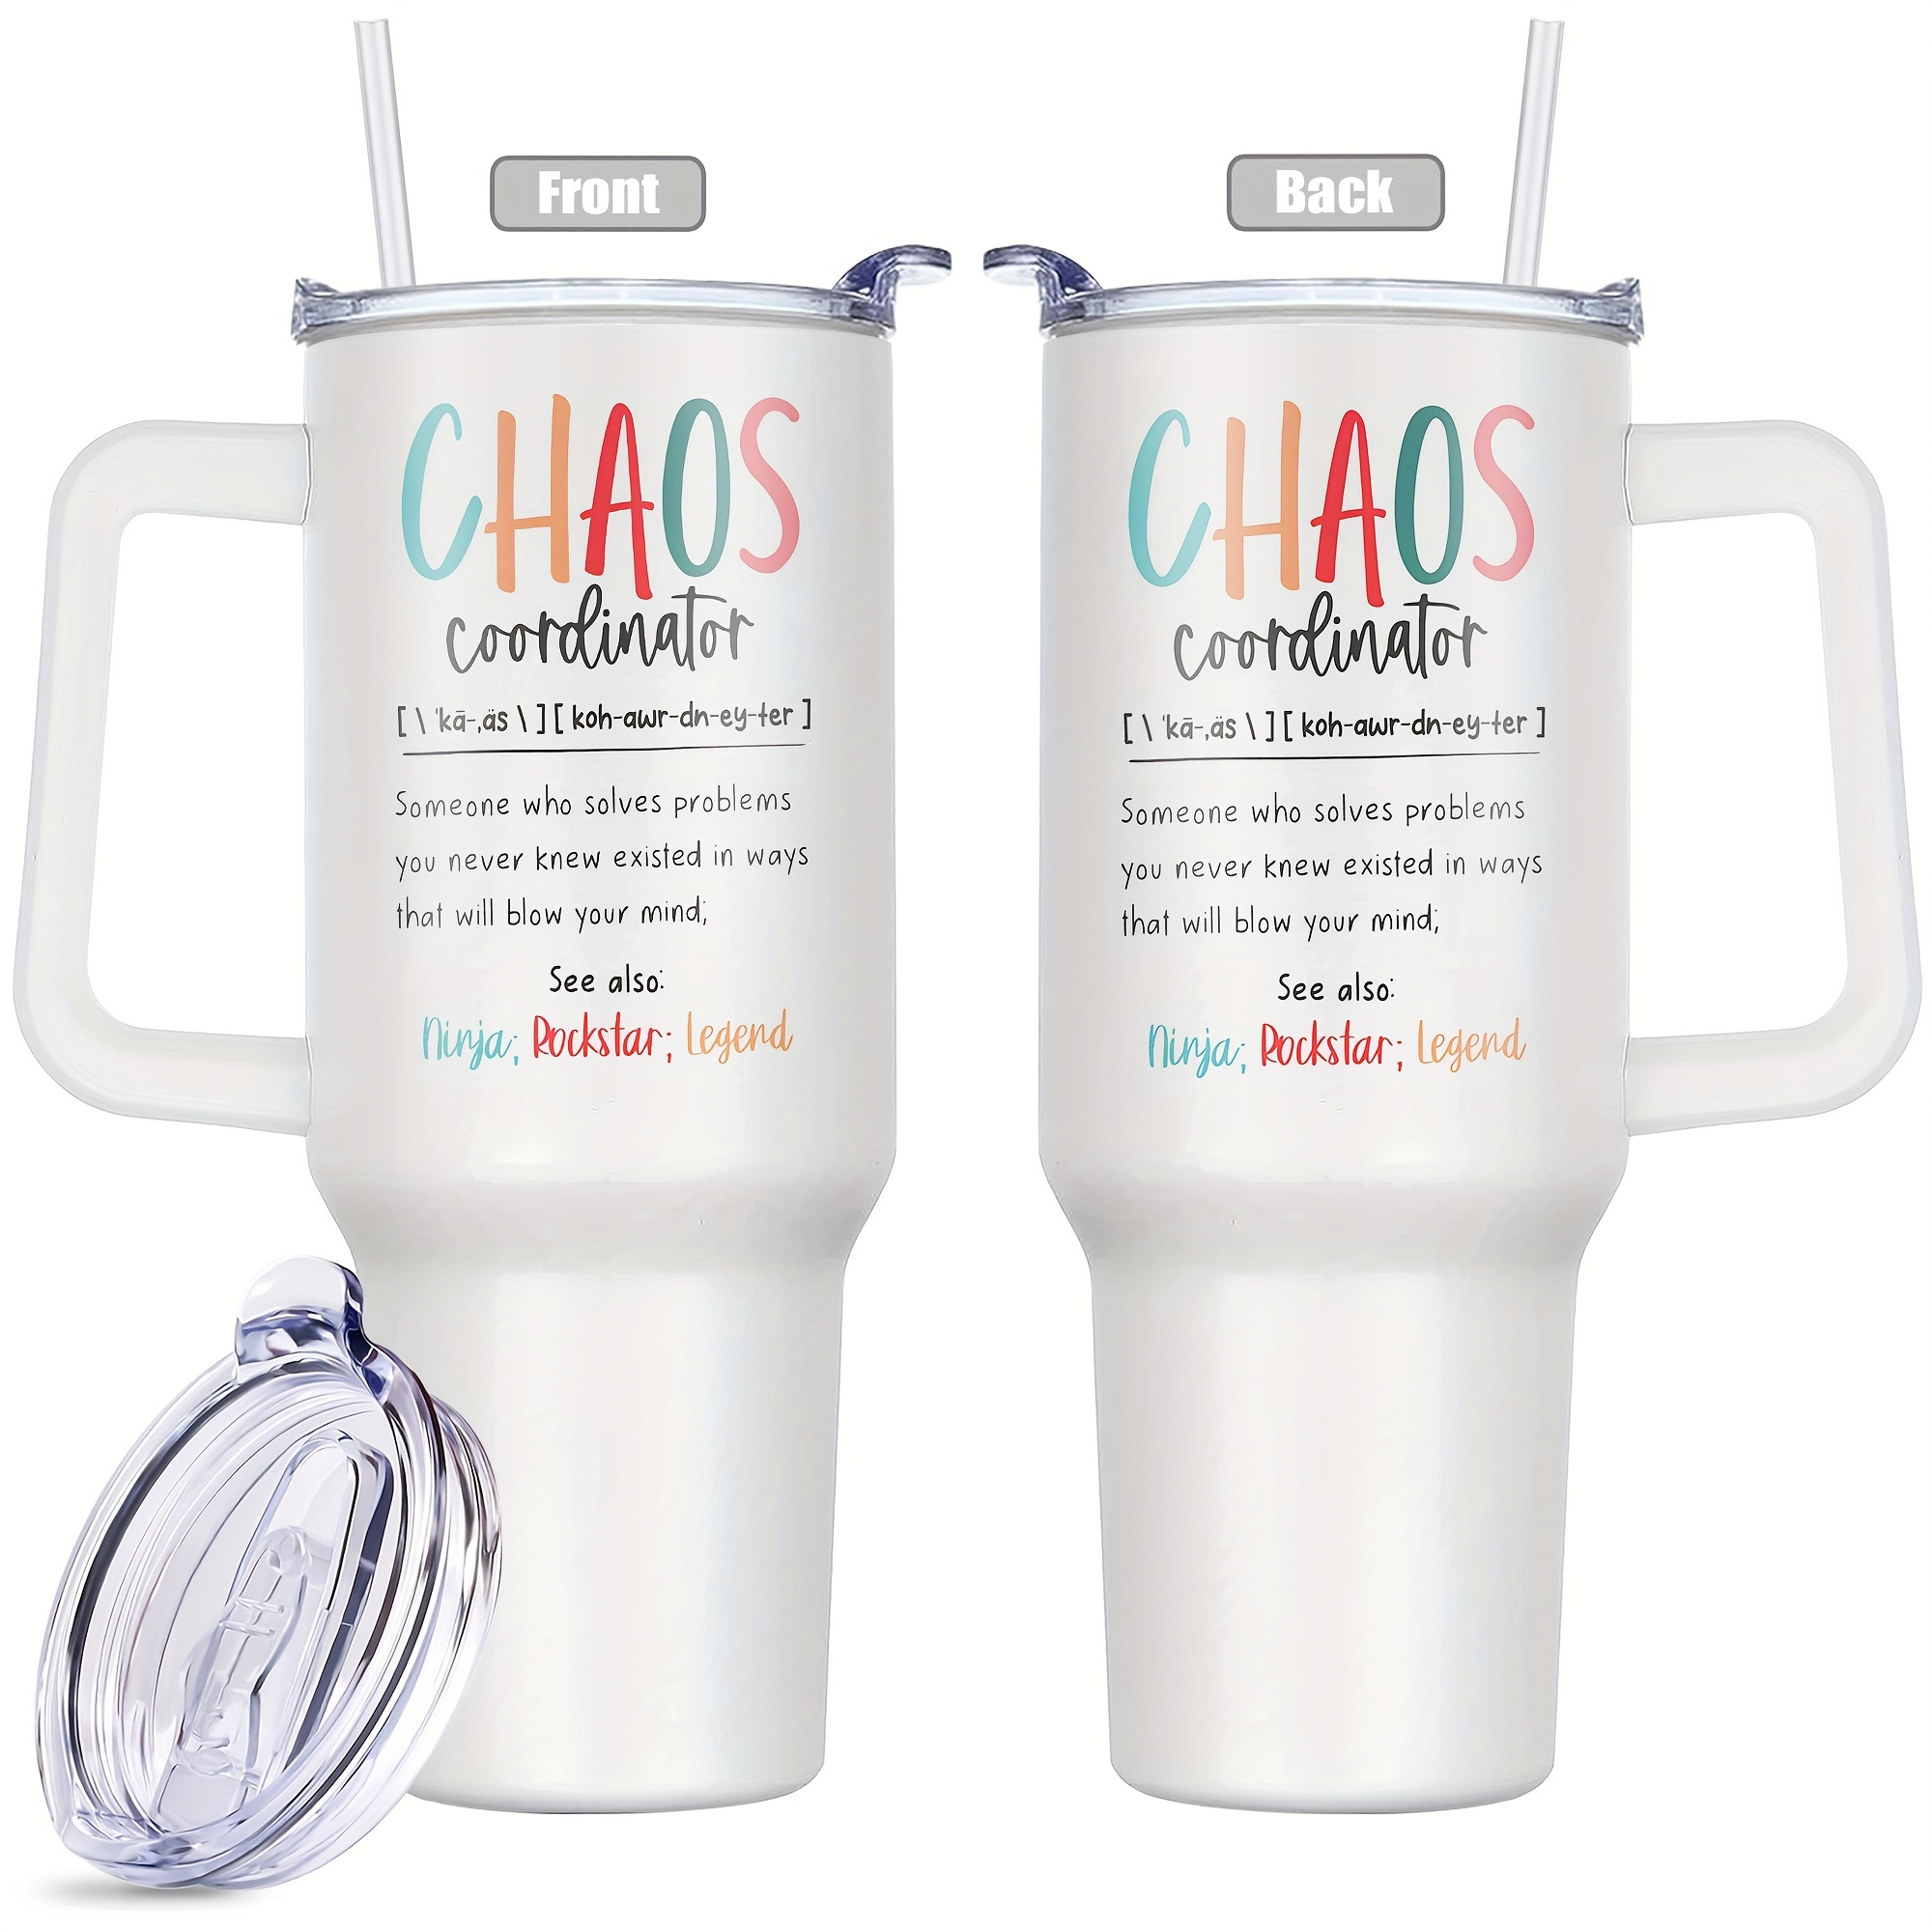 

Chaos Coordinator 40oz Tumbler - Perfect Gift For Women, Boss Lady Appreciation, Teacher & Coworker Thank You - Durable Metal, Reusable, Hand Wash Only